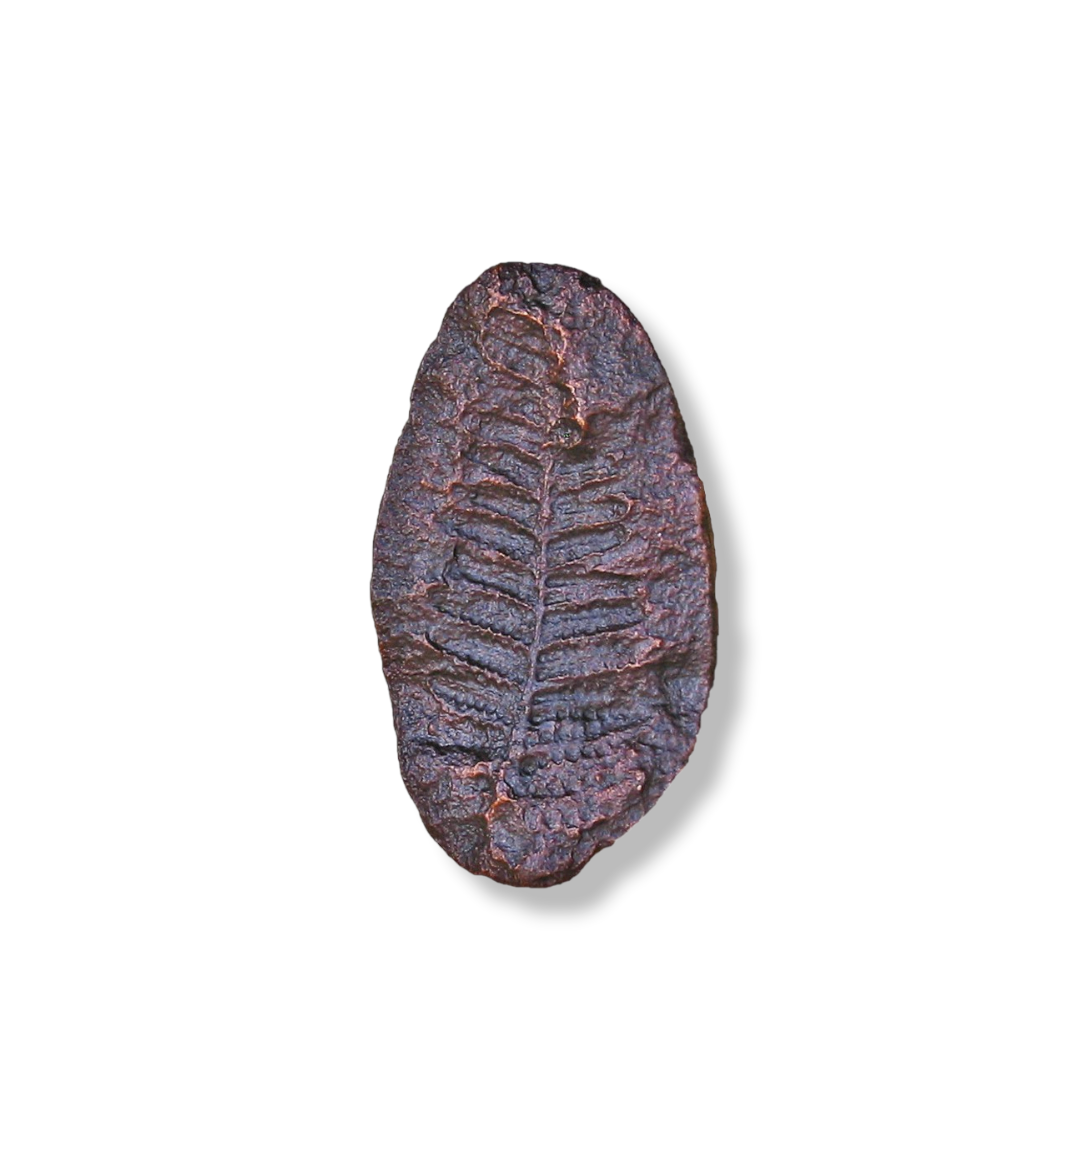 Our Fern Fossil Knob was found in nature and captured in solid bronze.  It has the irregular shape and texture of the original stone, including the imprint of the Fern Leaf. 